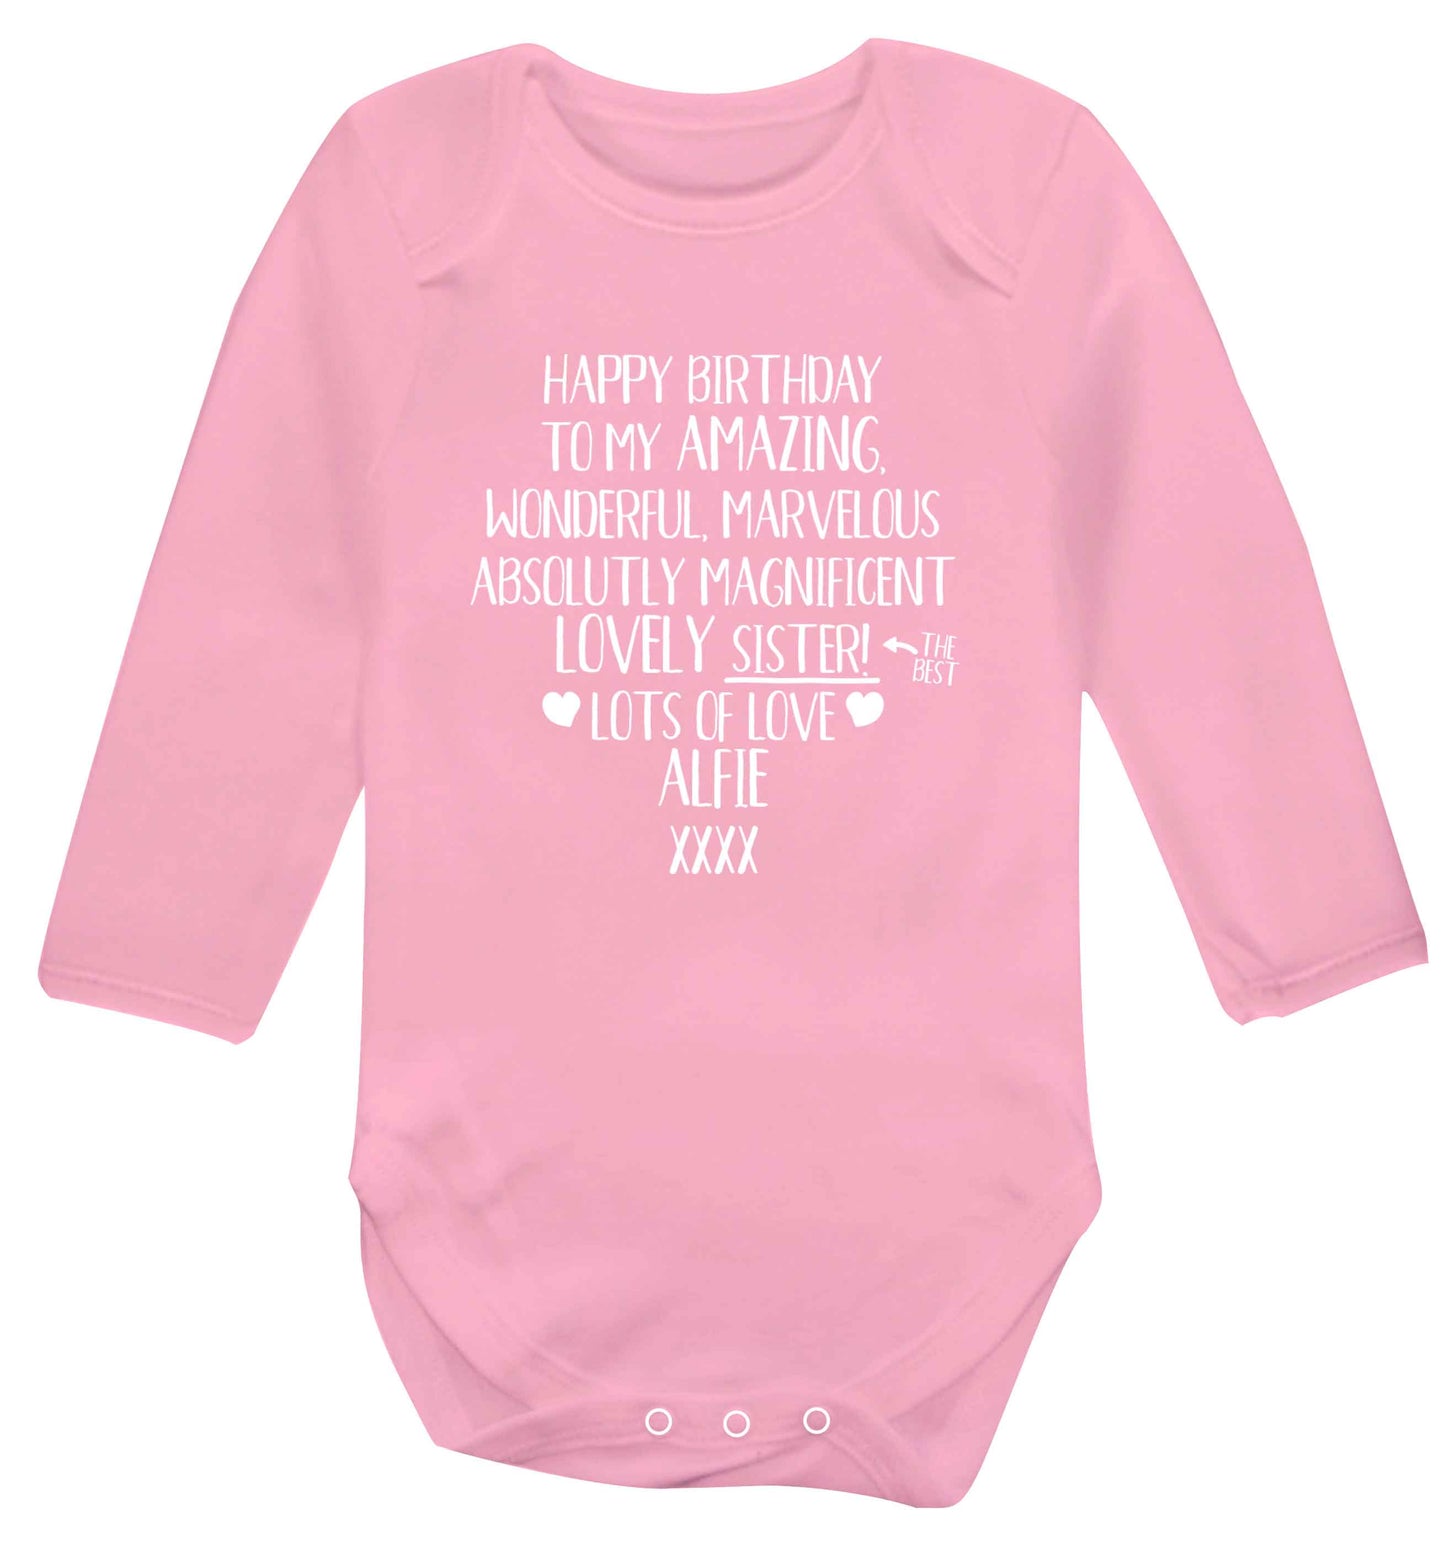 Personalised happy birthday to my amazing, wonderful, lovely sister Baby Vest long sleeved pale pink 6-12 months